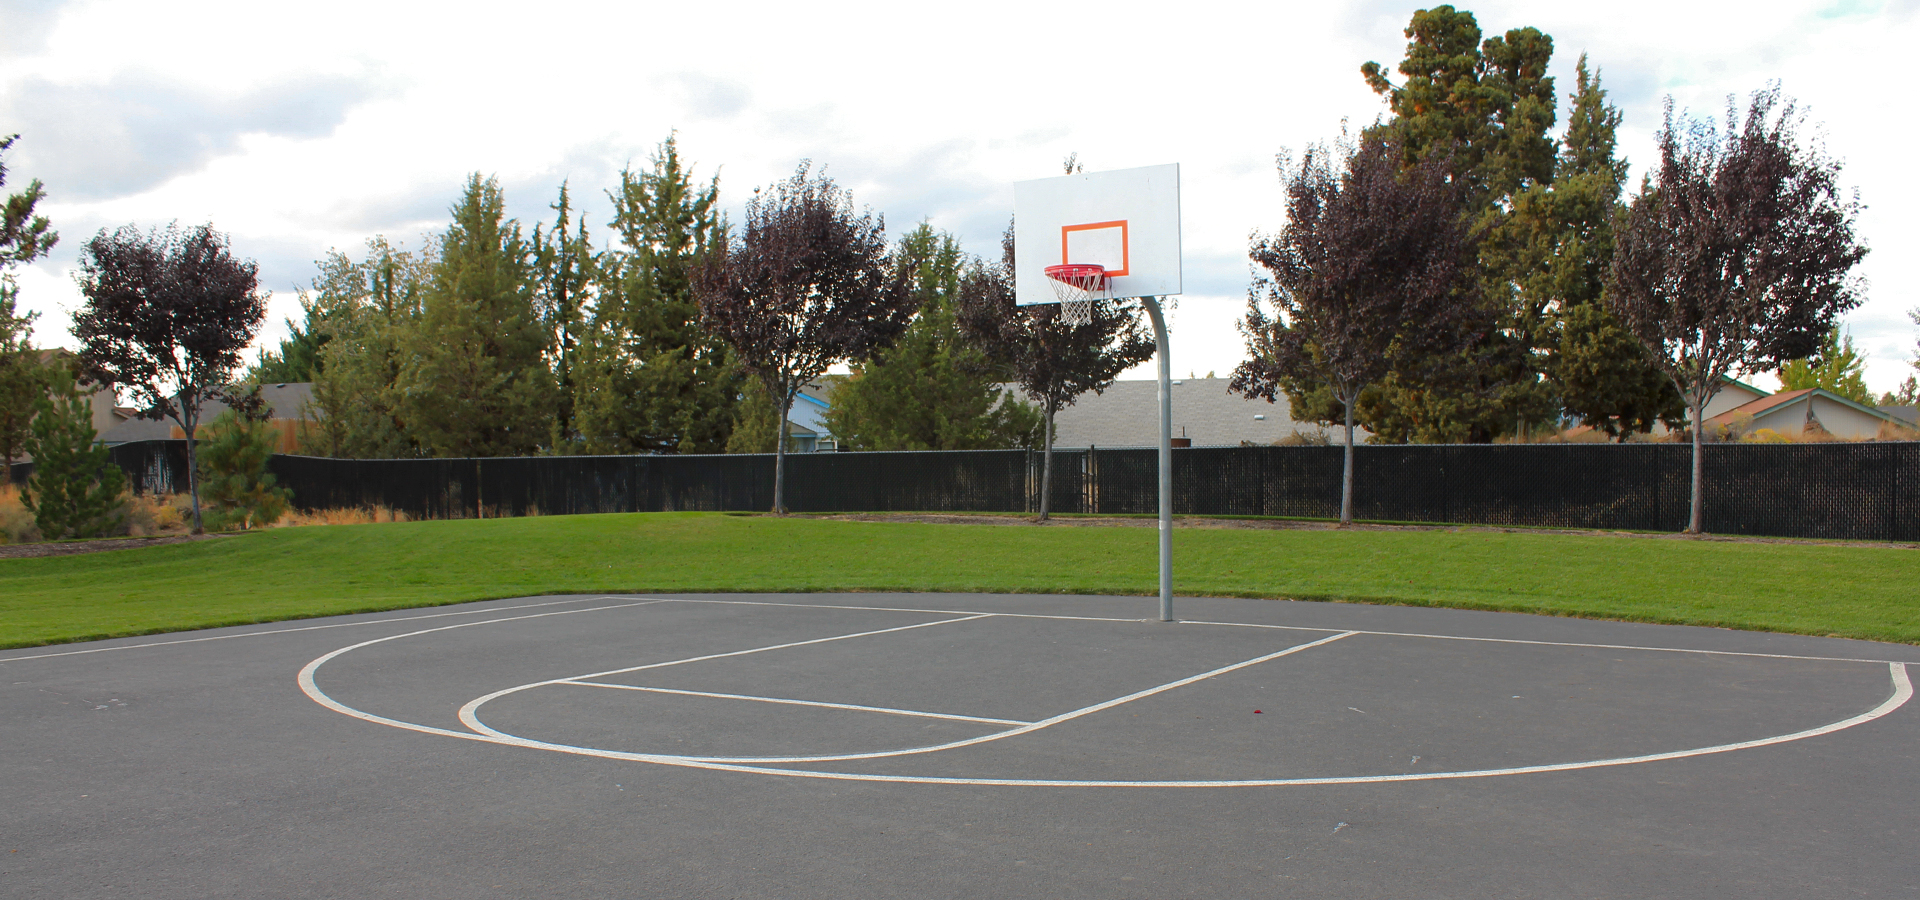 The basketball court at Boyd Acres Park.